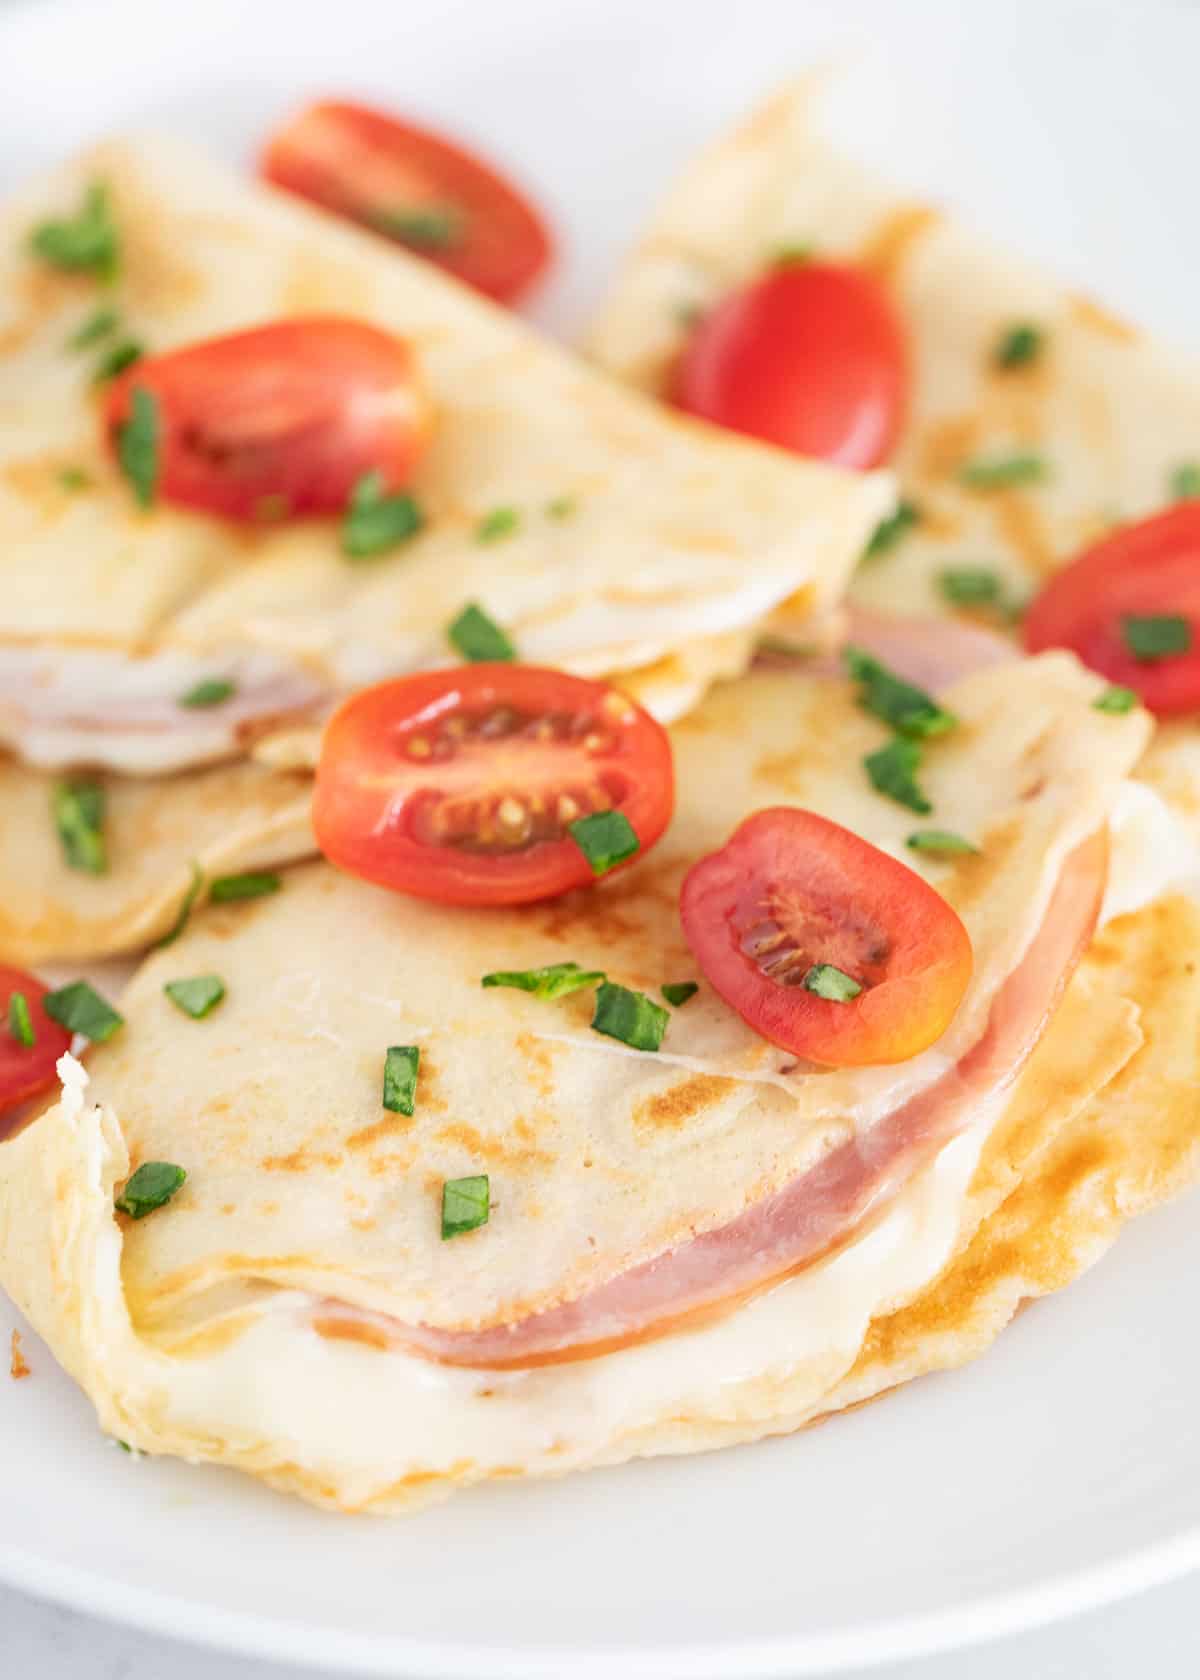 Ham and cheese crepe on white plate.